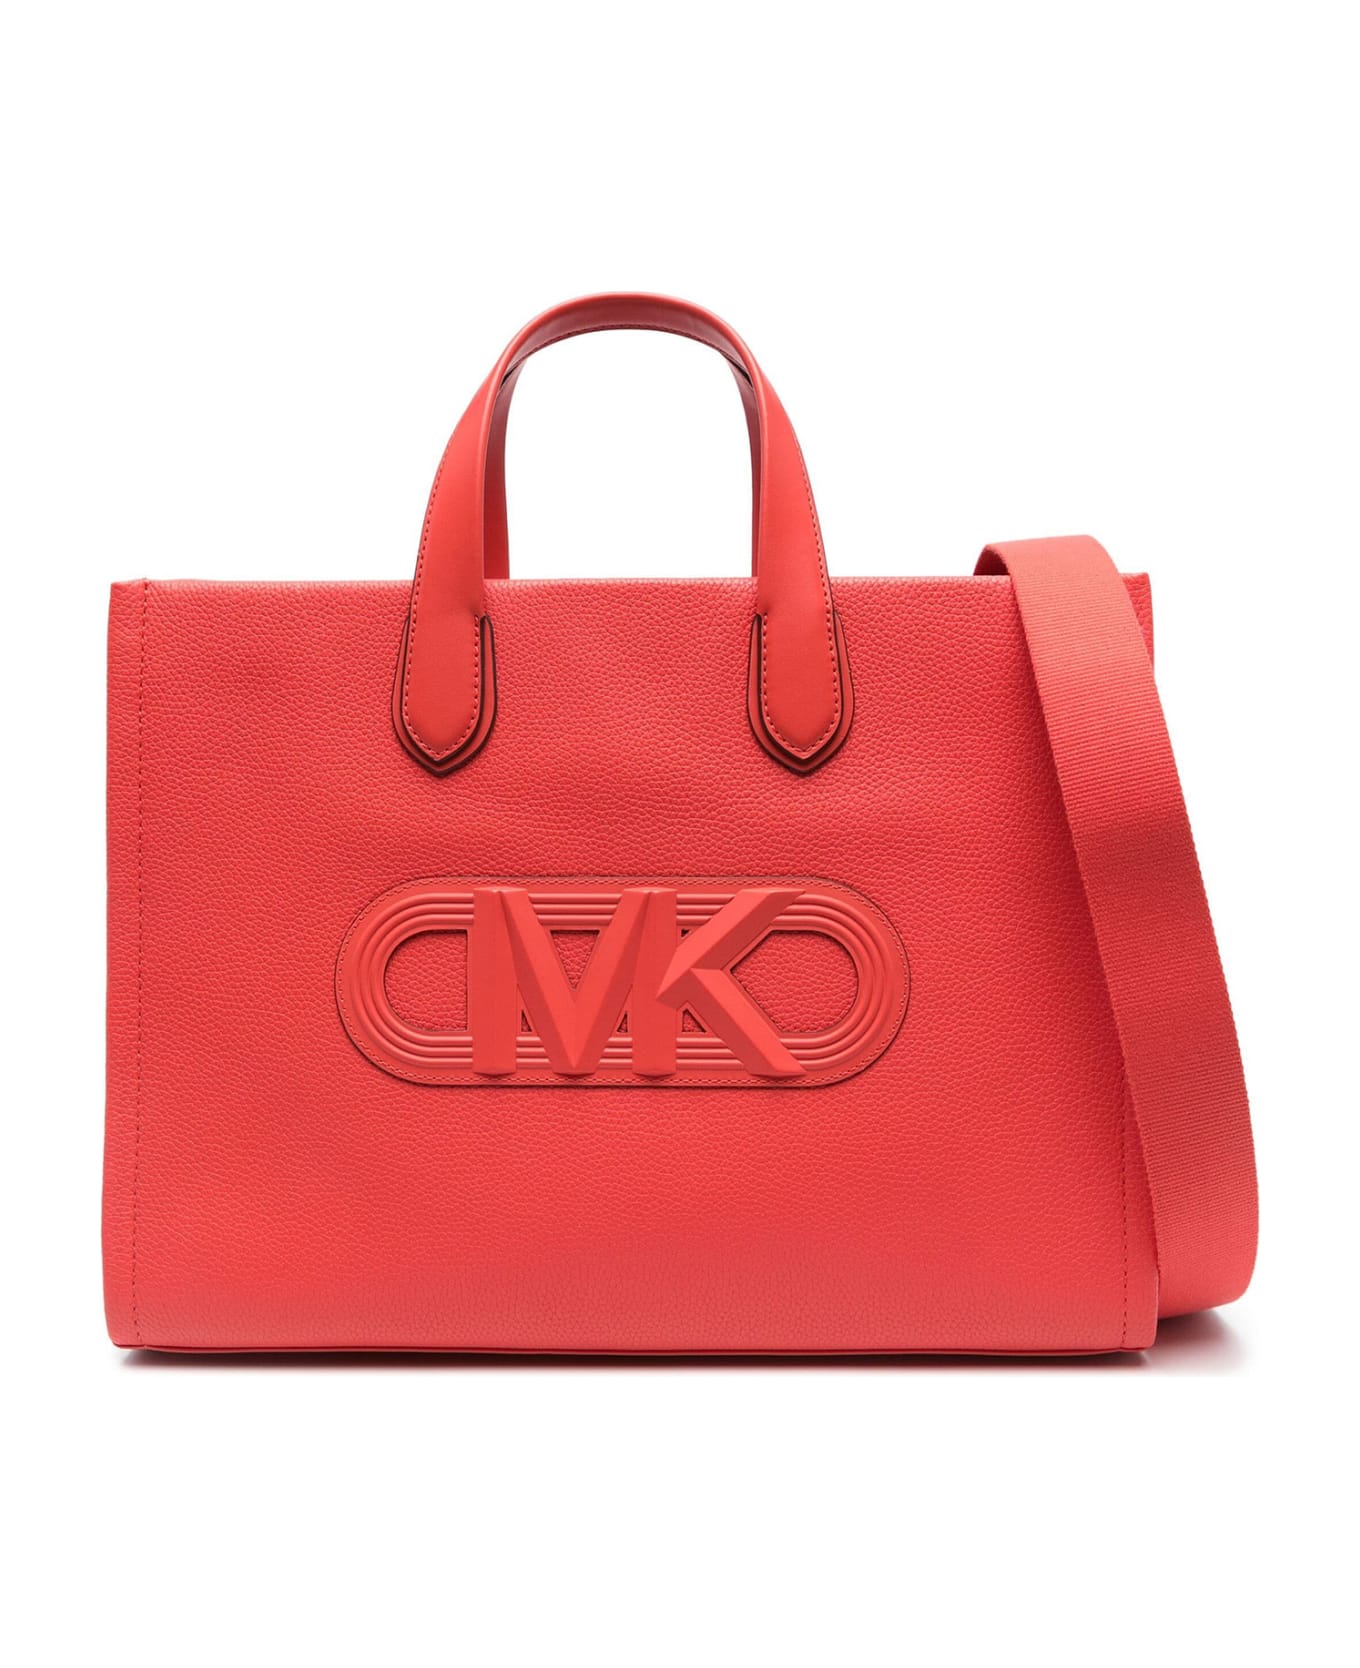 Michael Kors Large Tote Bag With Logo - SPICED CORAL